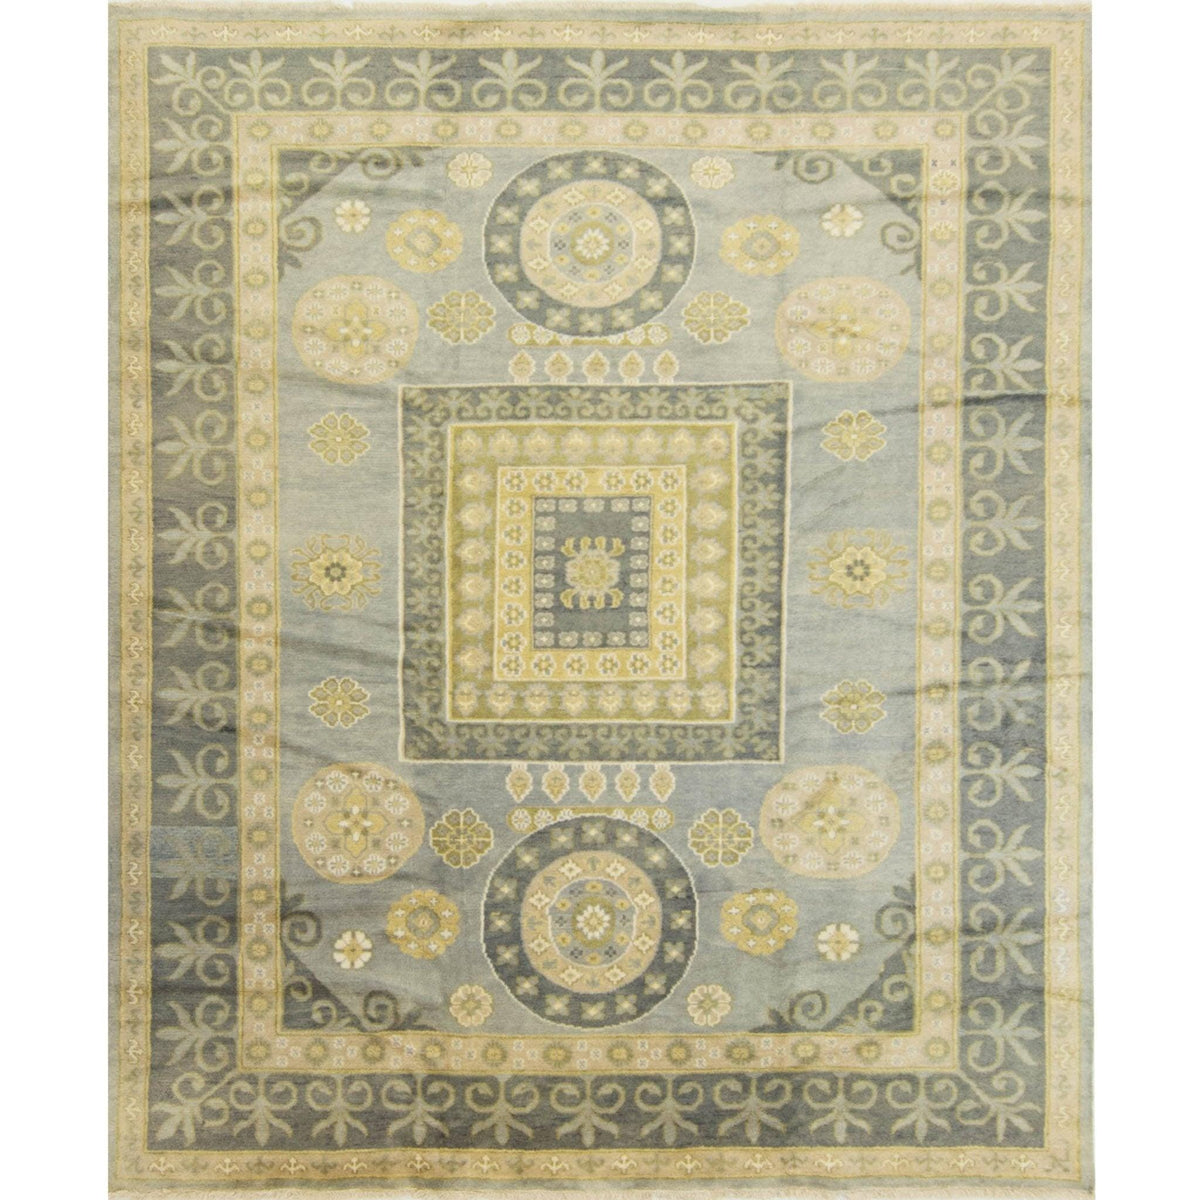 Hand-knotted Wool Kothan Rug 242cm x 290cm